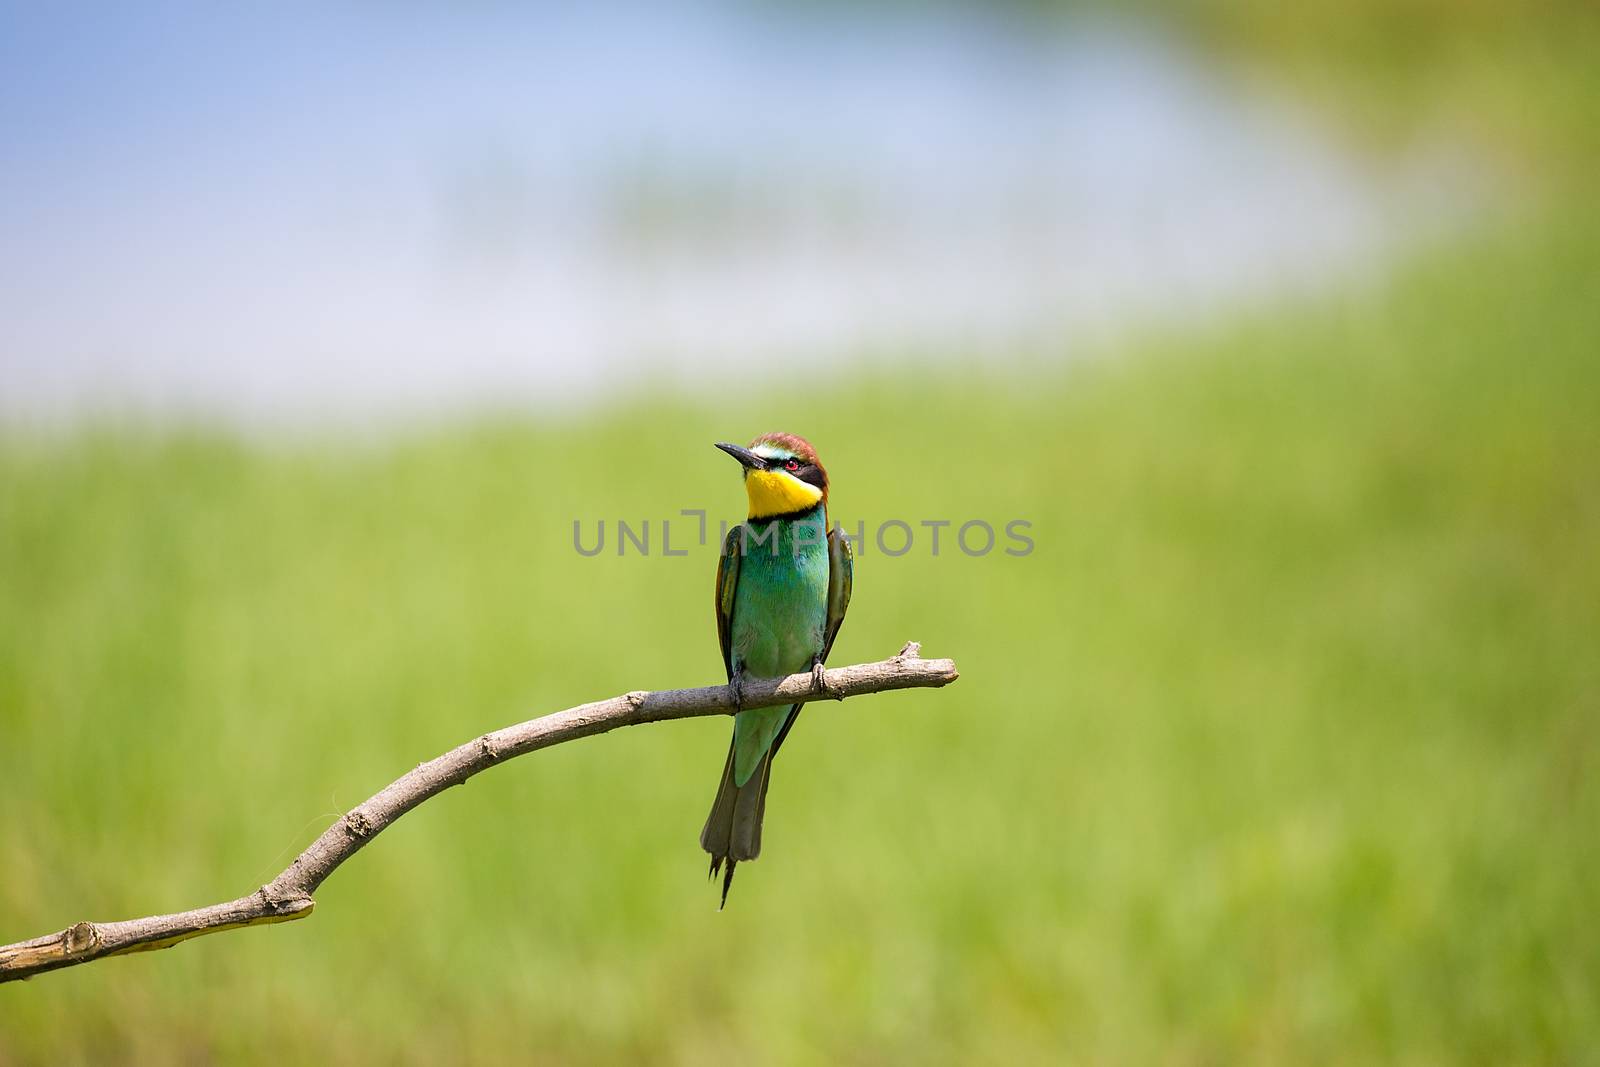 European Bee-eater (Merops apiaster) on brunch by Tanja_g